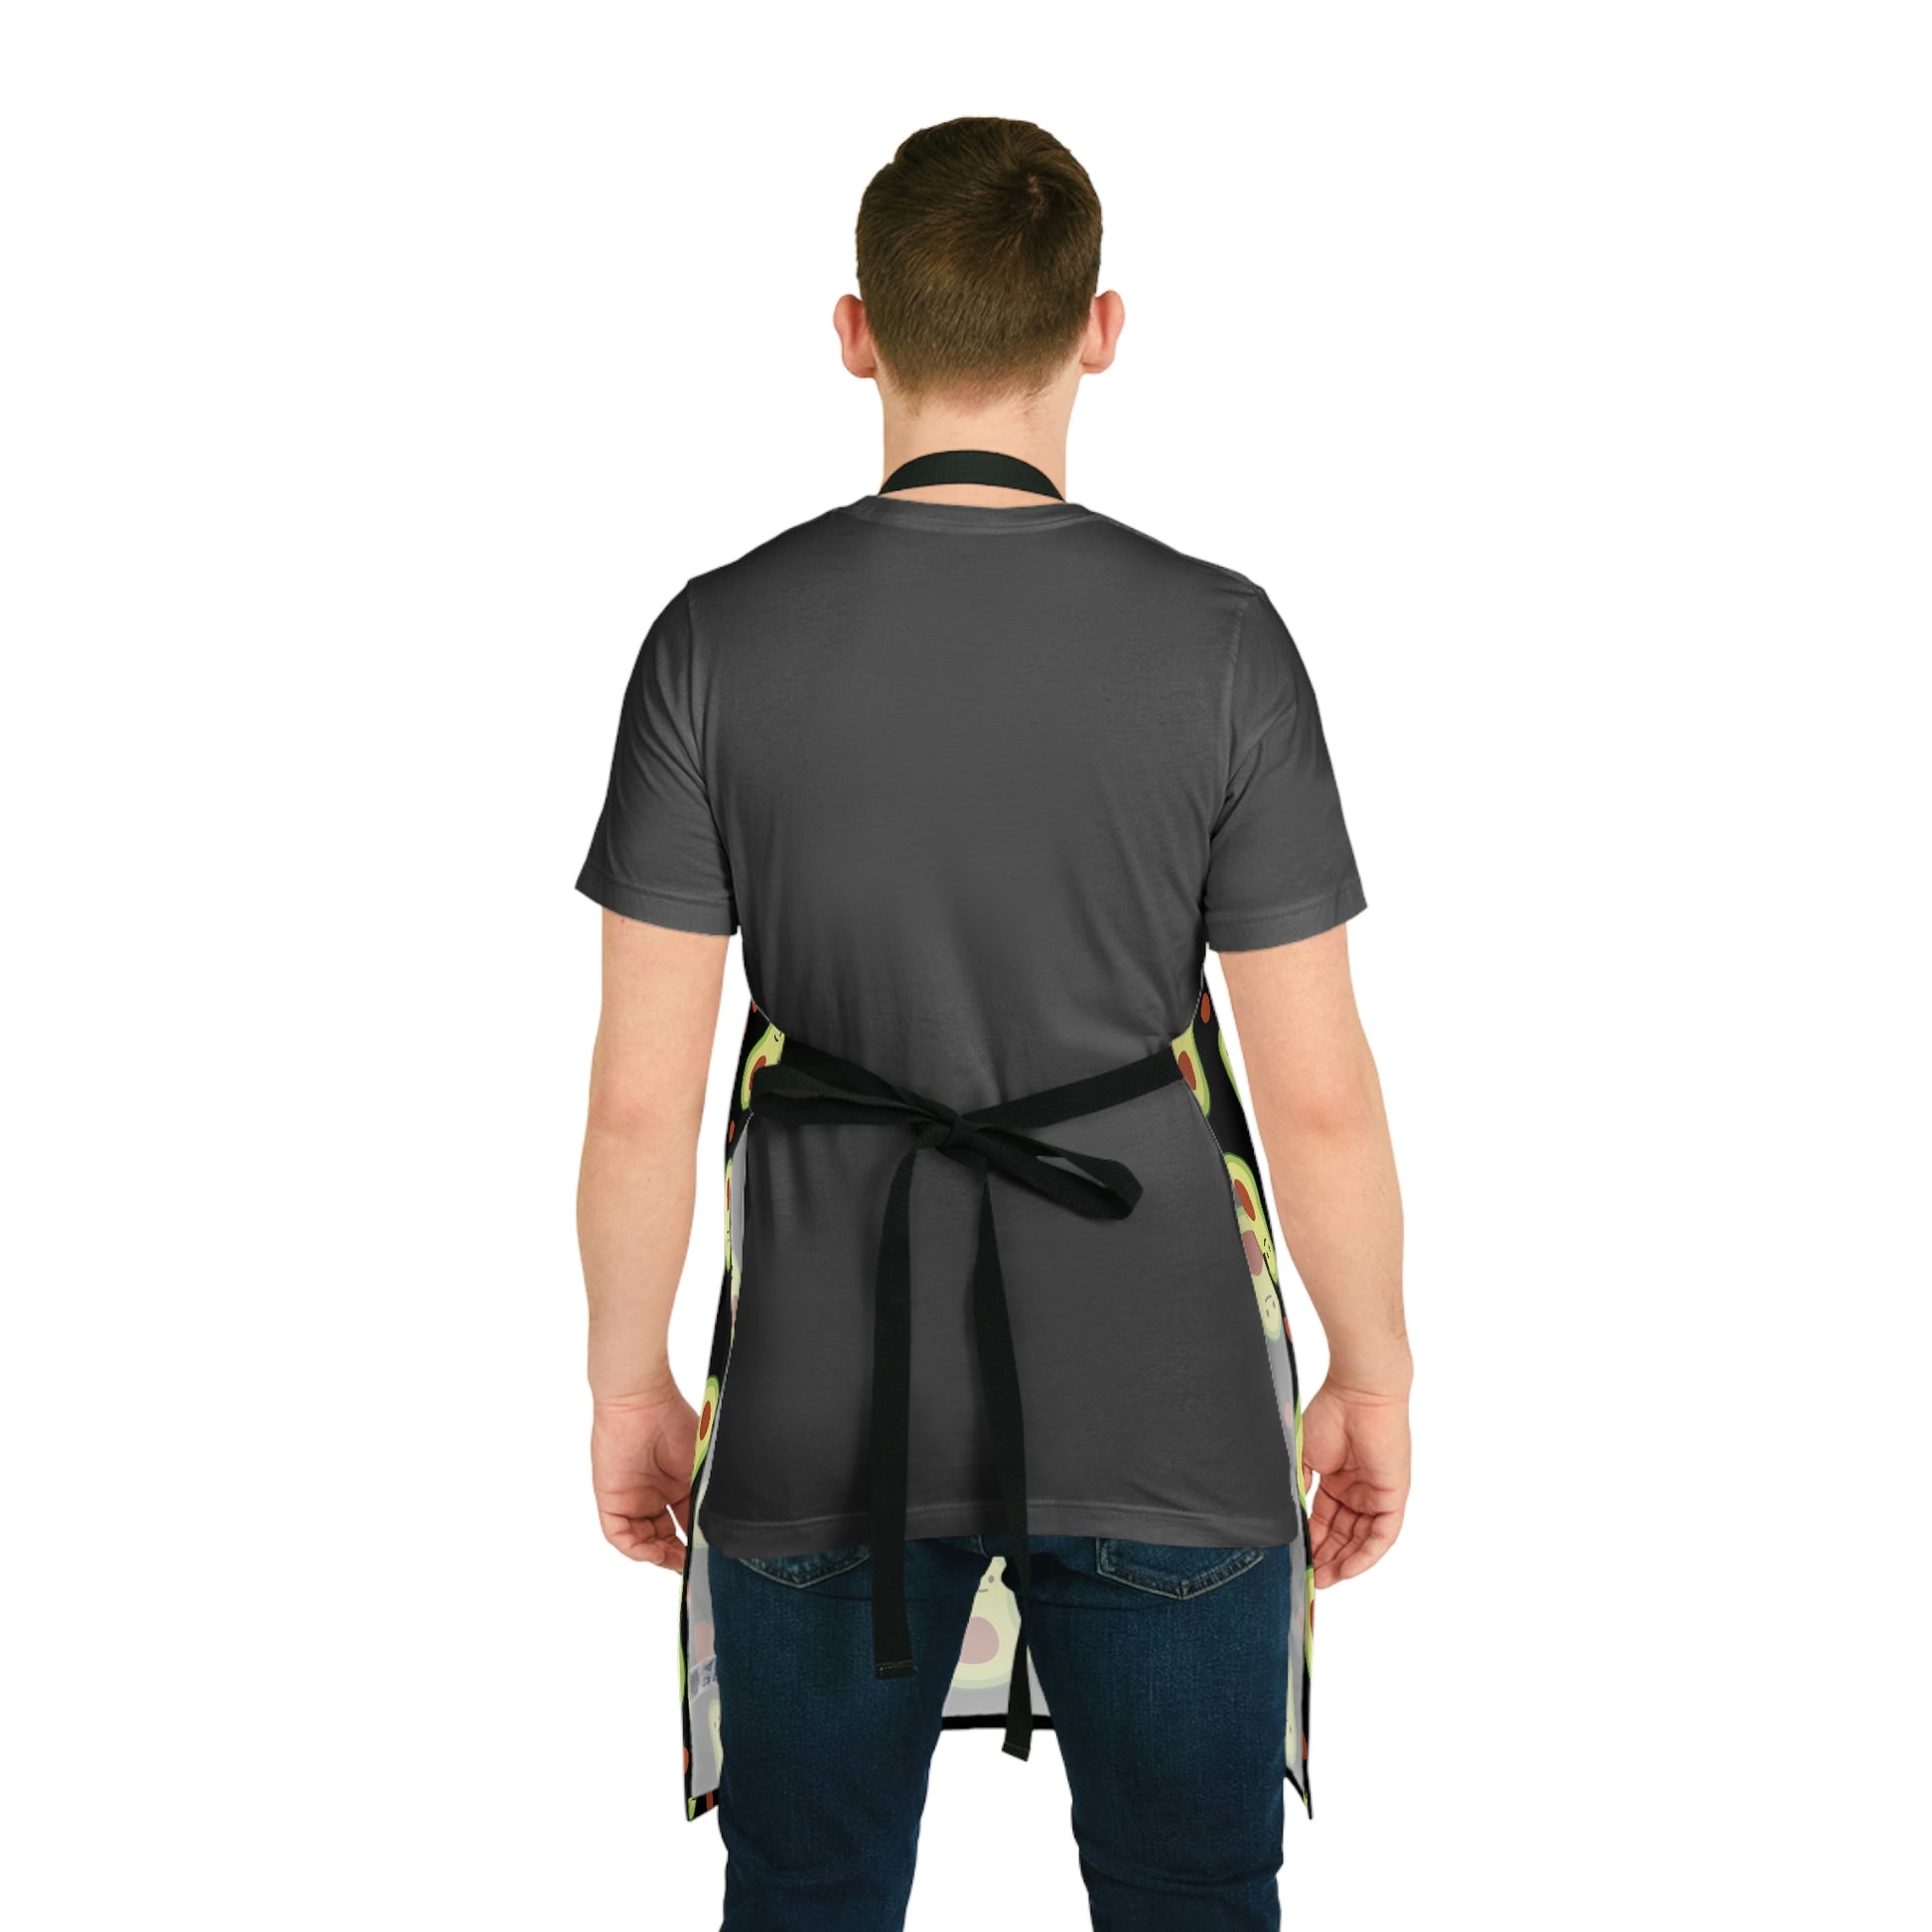 Mock up of the back of the apron as worn by a man